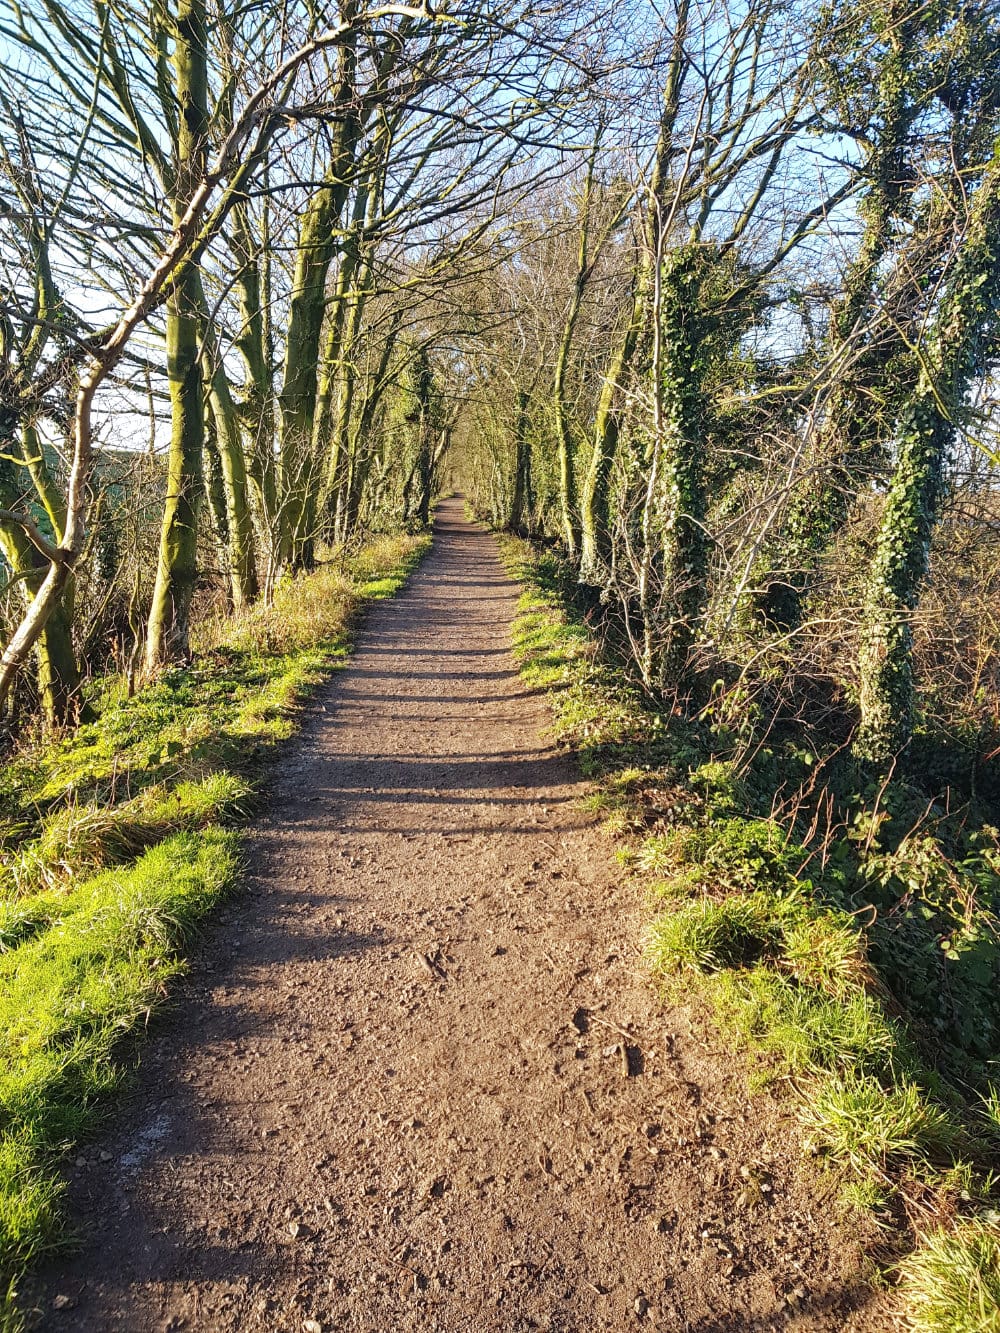 Footpath in nature, lined with trees